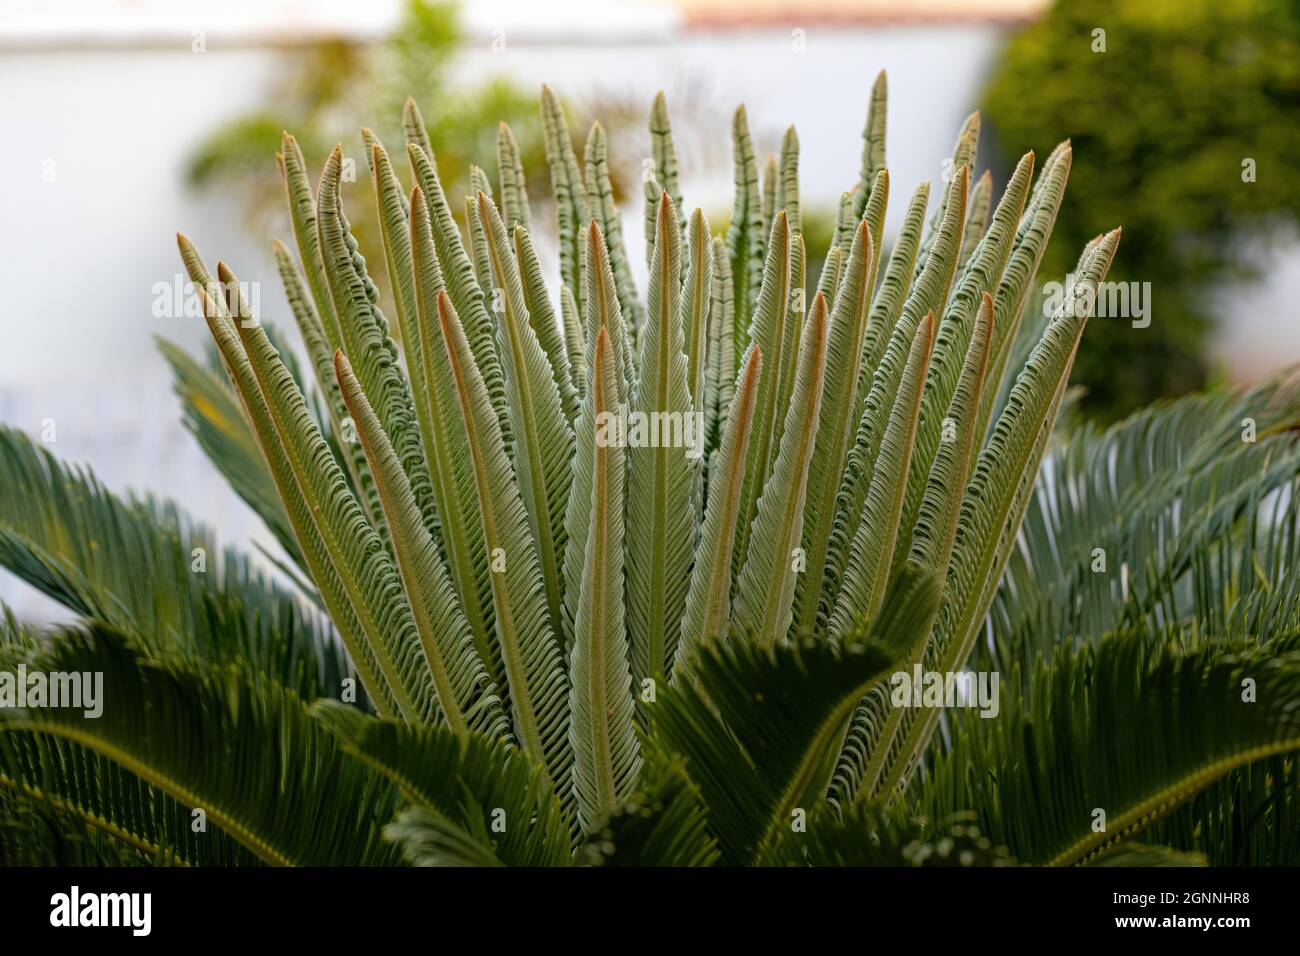 Green Cycad Plant of the Genus Cycas Stock Photo